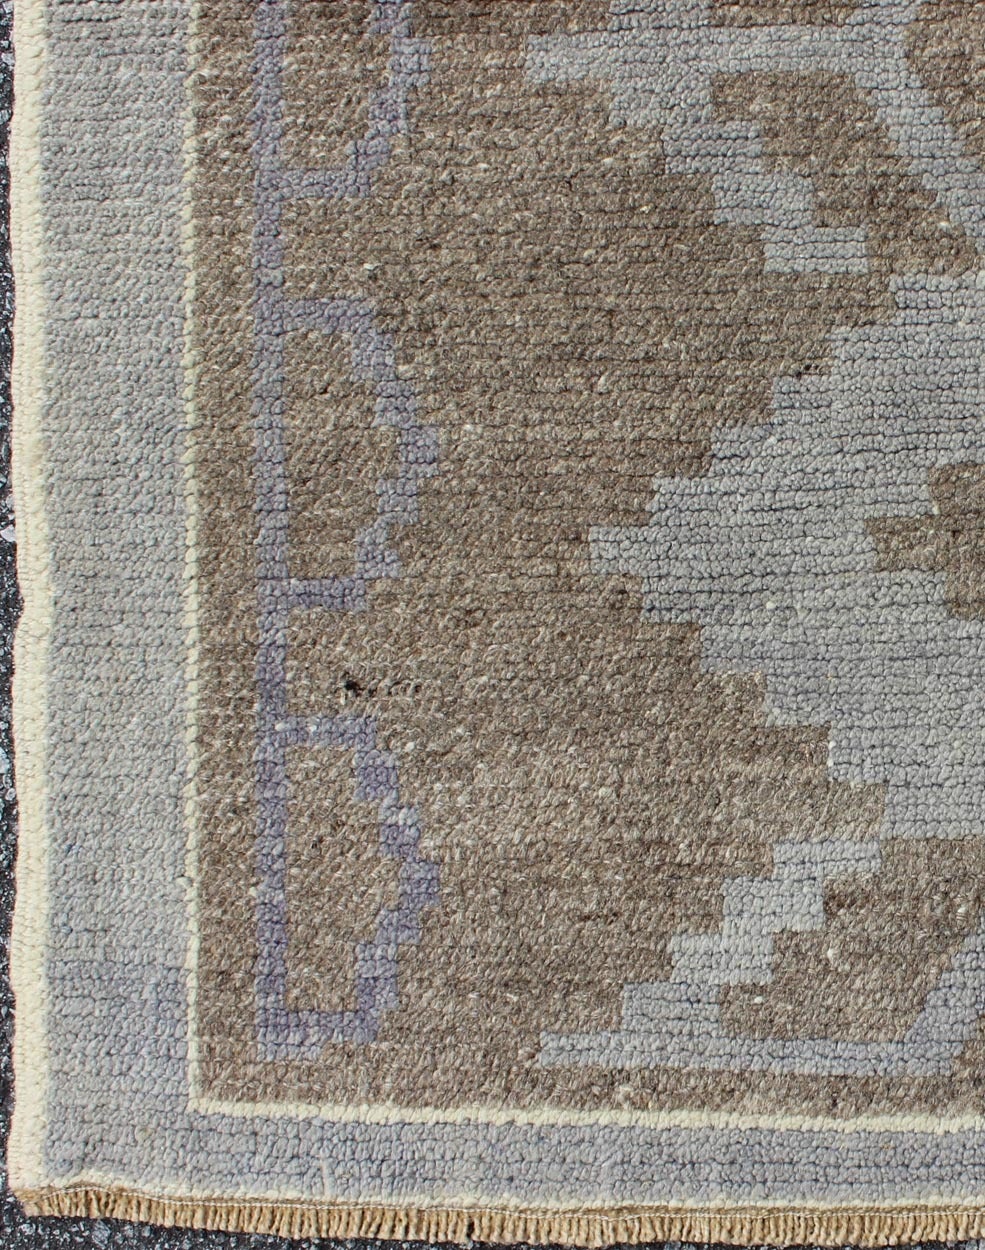 This vintage Turkish rug from Konya is characterized by an appealing modern design and contemporary color combination. The various blends of slate gray and light brown emphasize the motifs along the main body of this unique rug. This rug has been